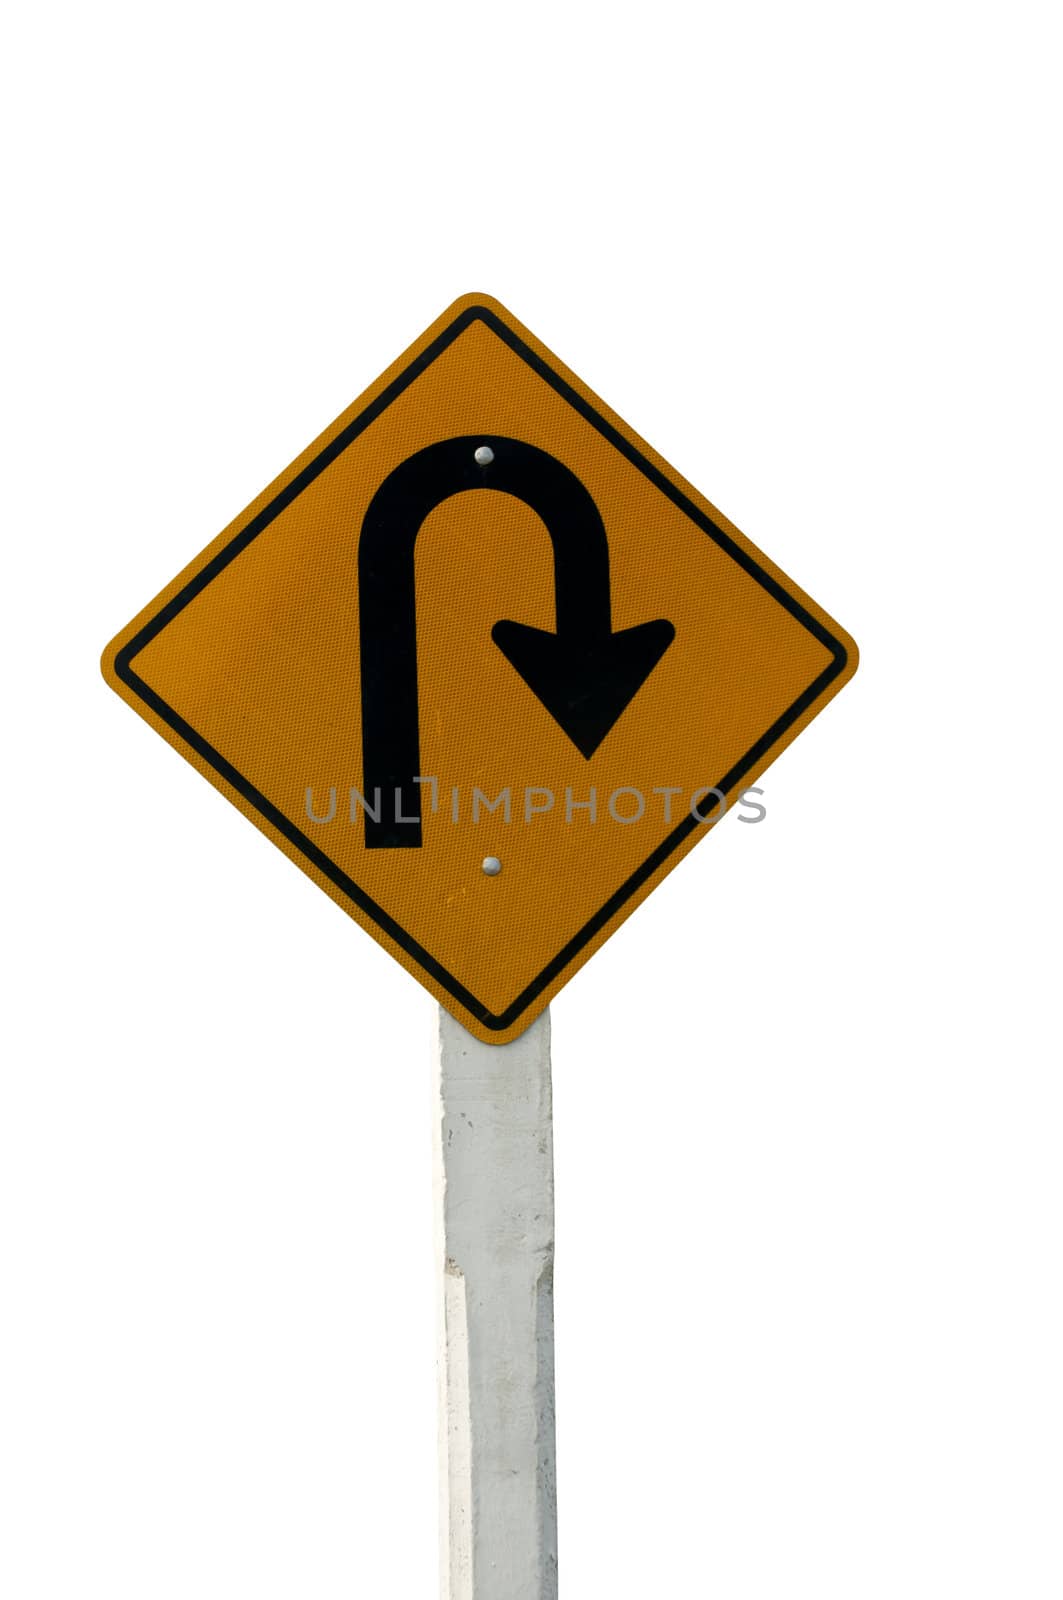 A U-turn sign by photoland